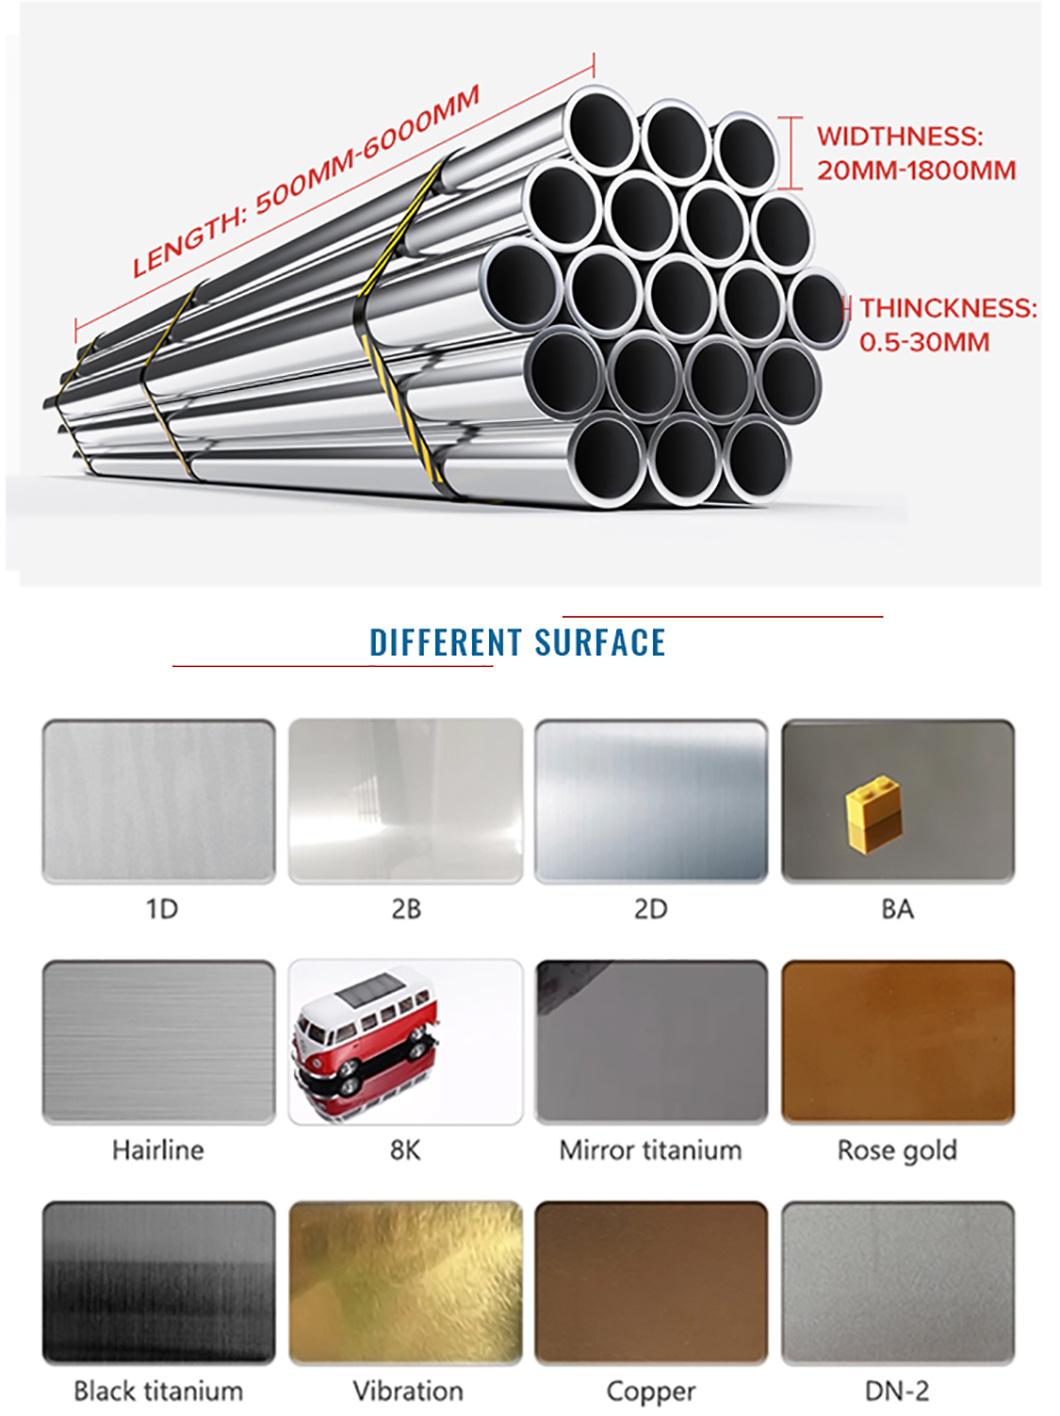 Good Price S32750 2507 Stainless Steel Welded Pipe